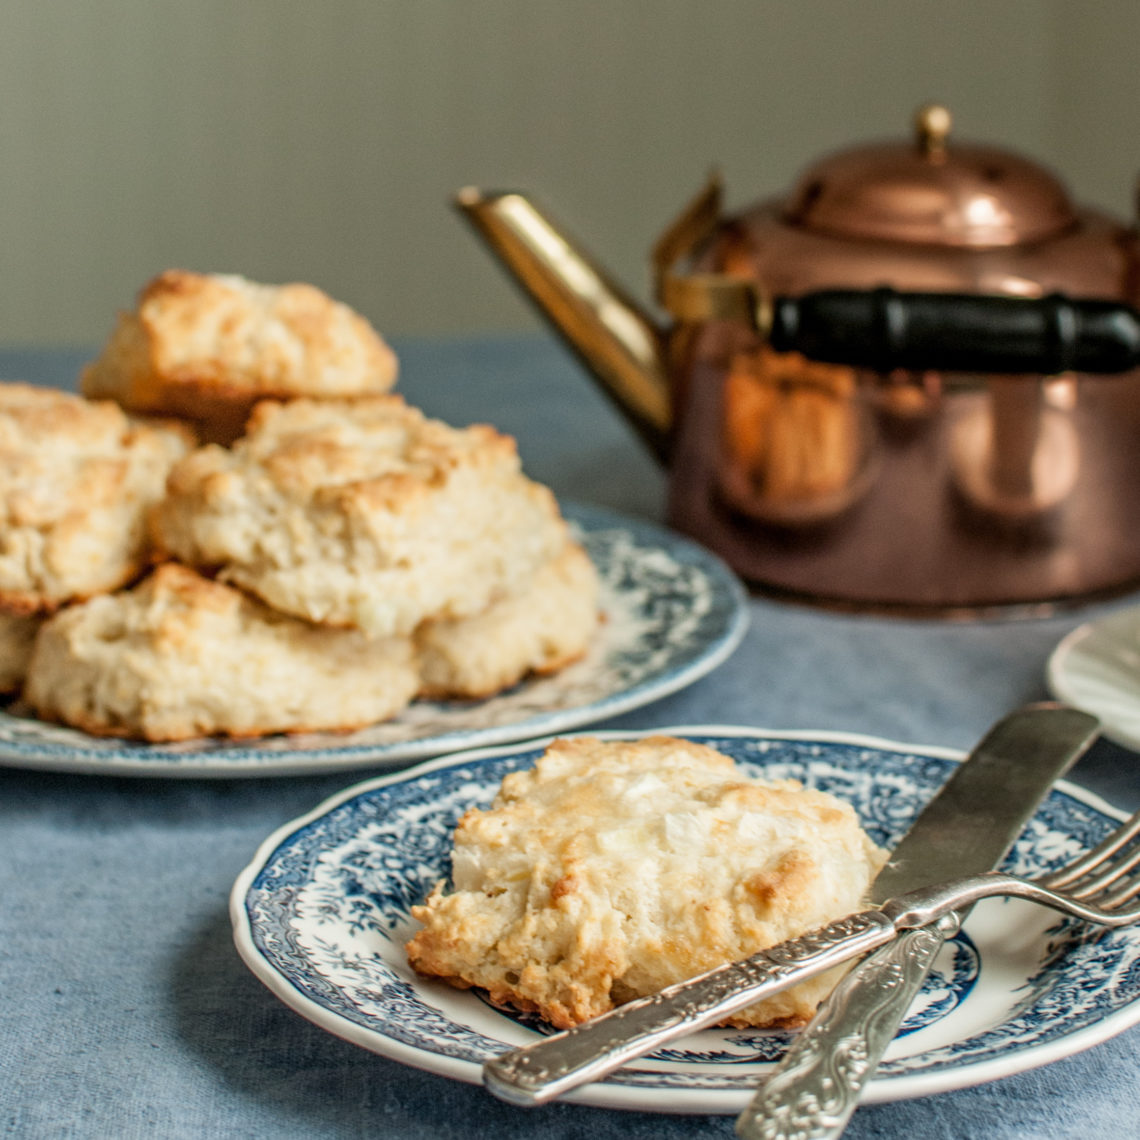 Printable Recipe for buttery, fluffy, savory biscuits. Simple Delicious recipe from Cottage Chronicles Blog.